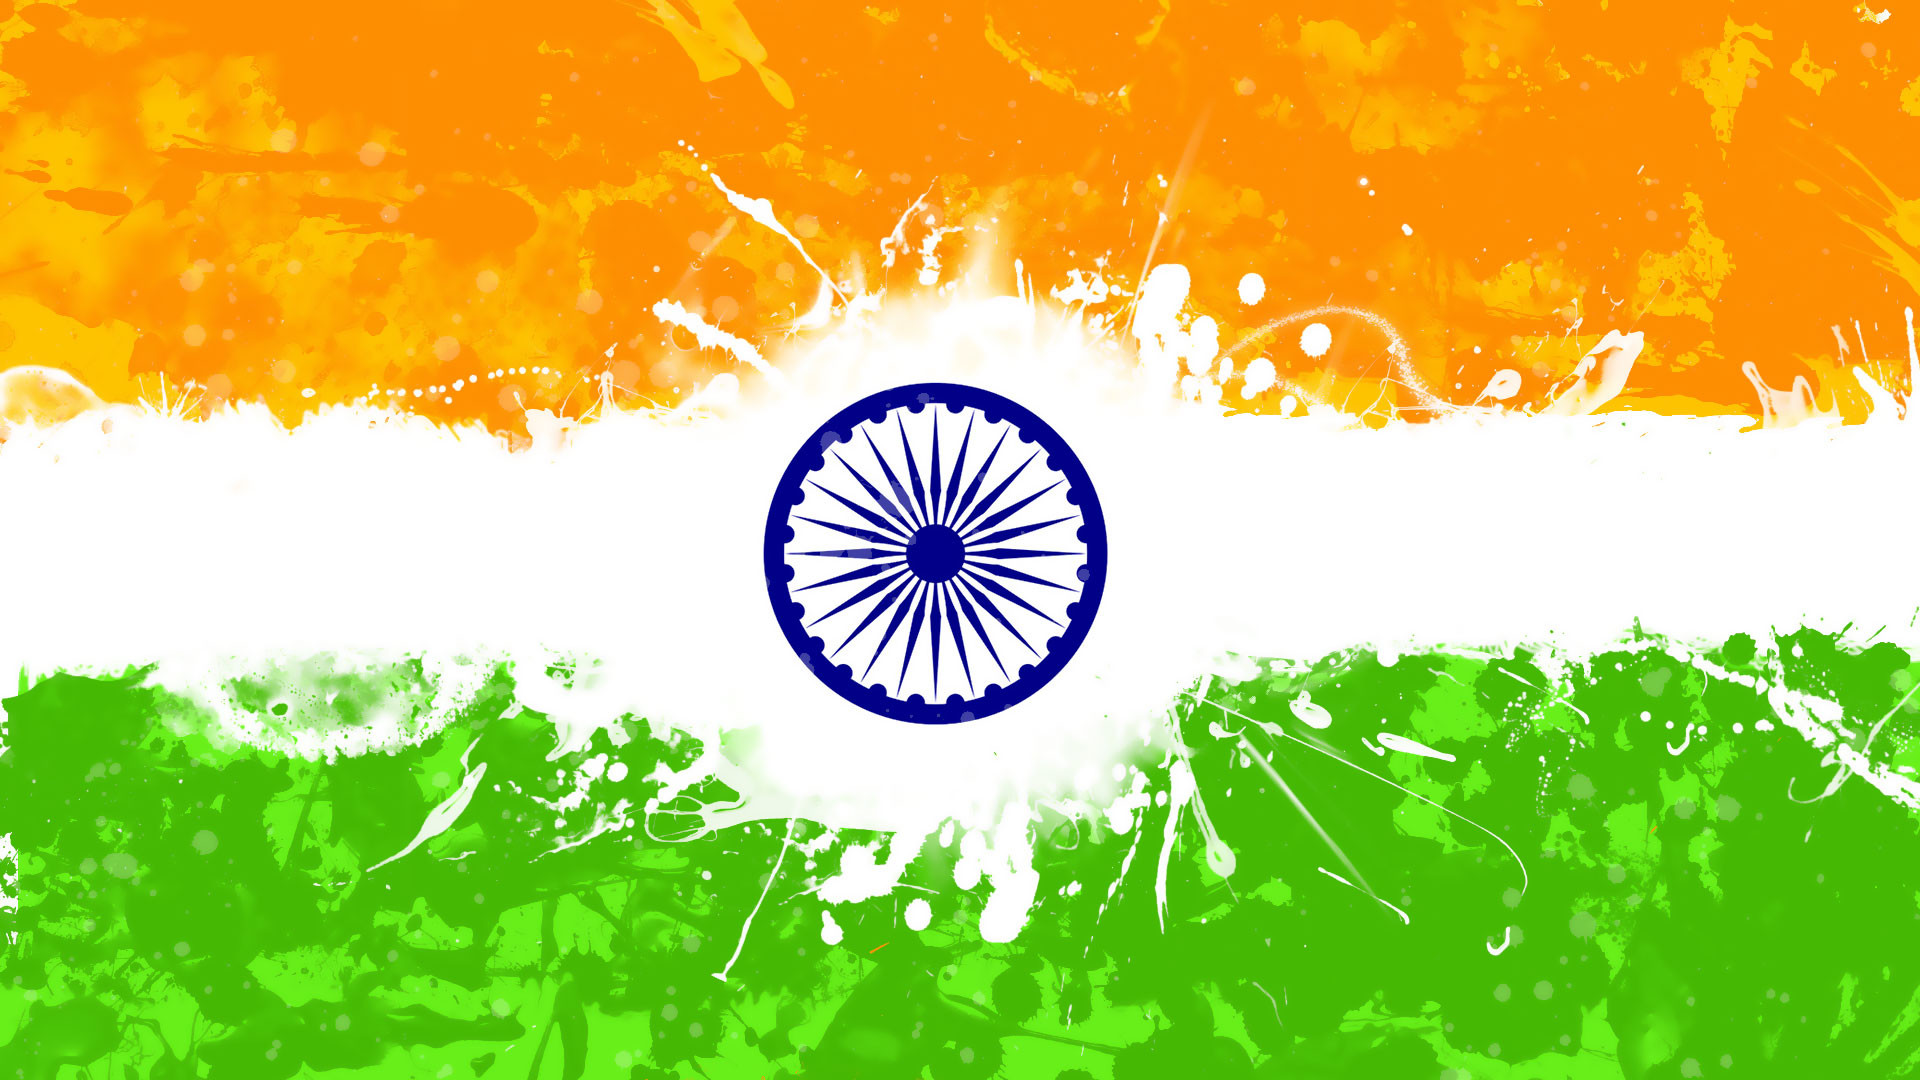 Download Free 15th August/ Independence Day Flags Banner - Indian Flag  Background Hd - 1920x1080 Wallpaper 